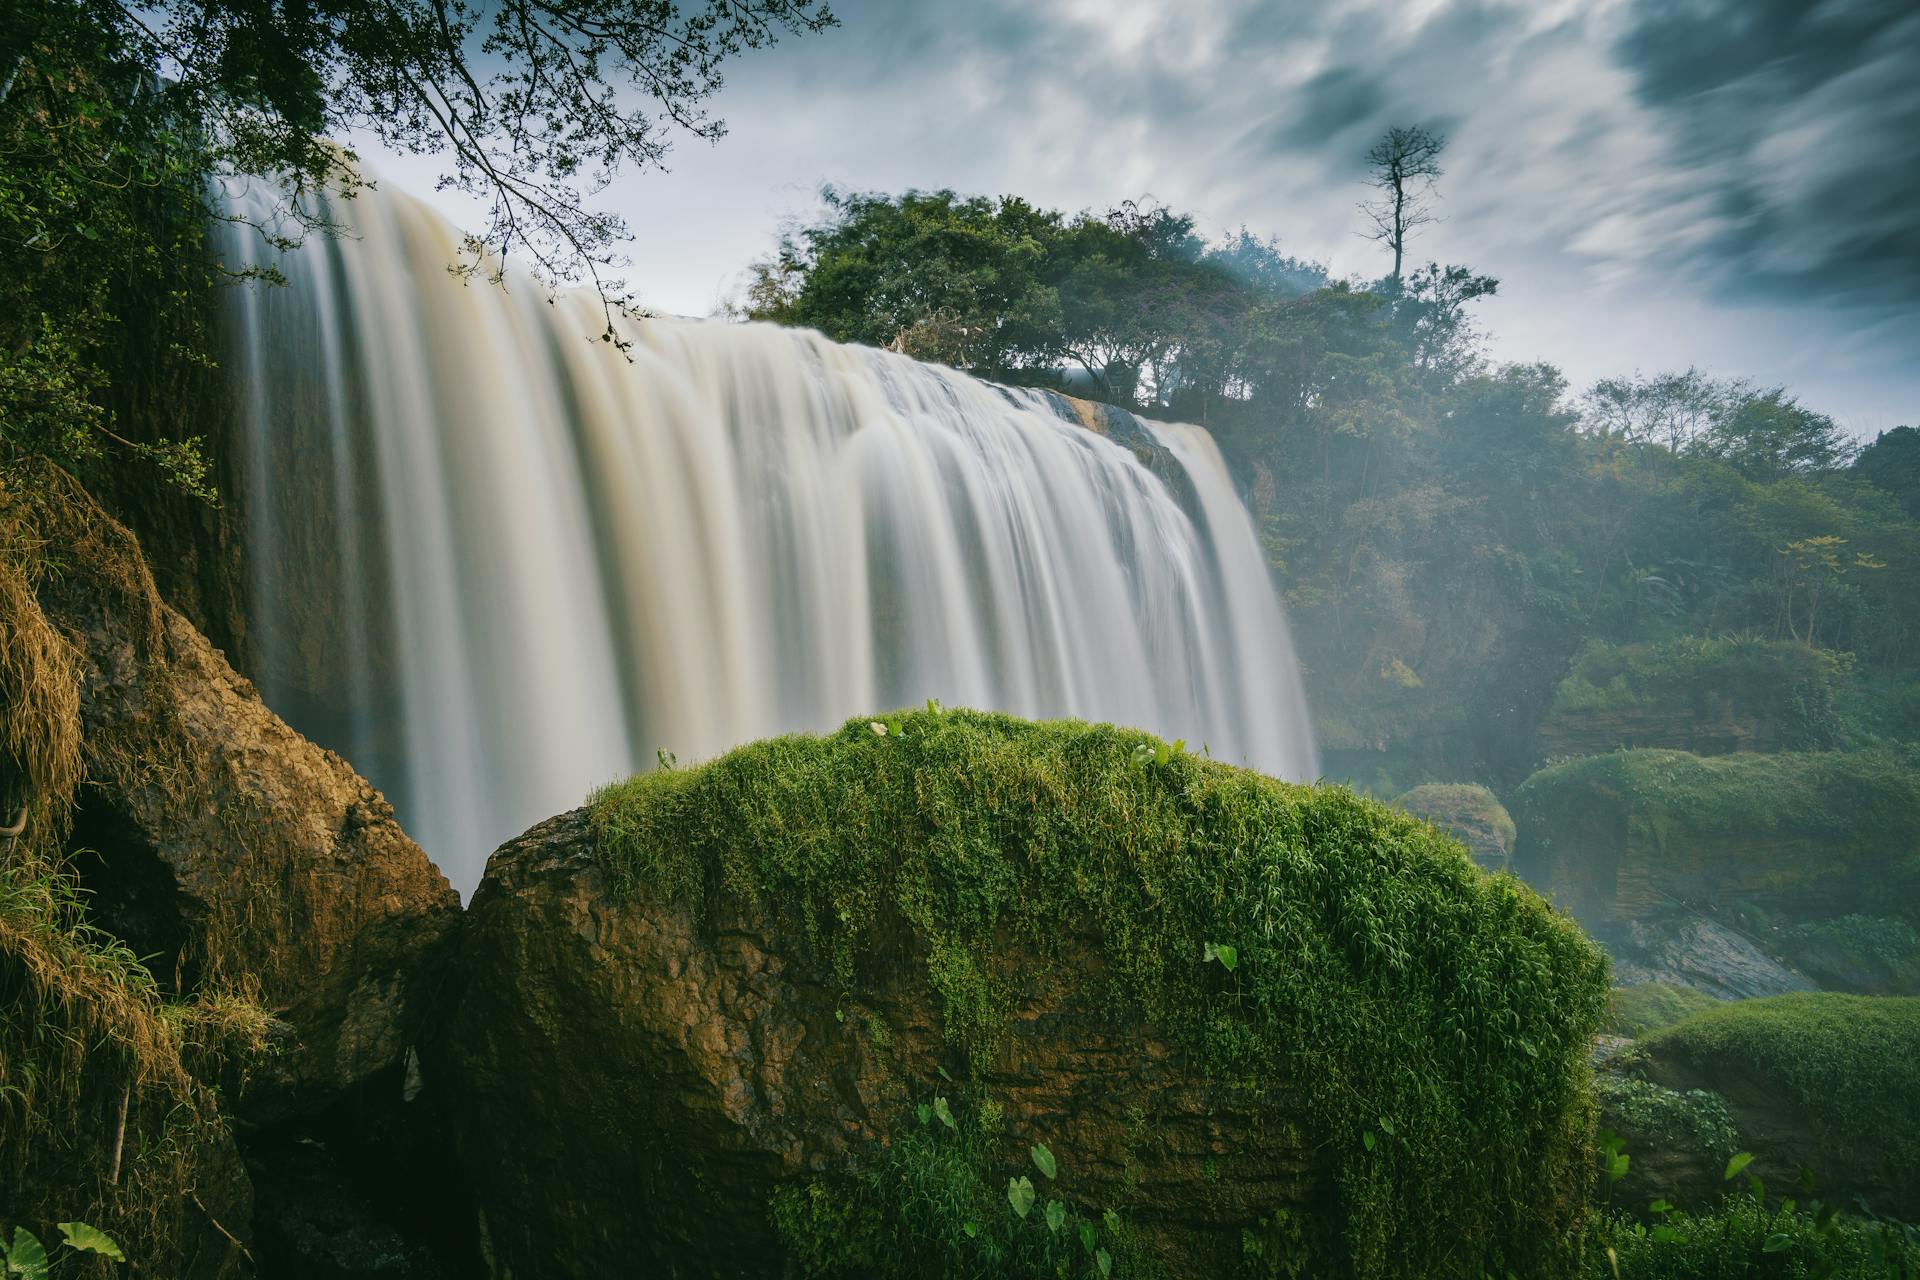 Photography of Waterfalls Surrounded by Trees